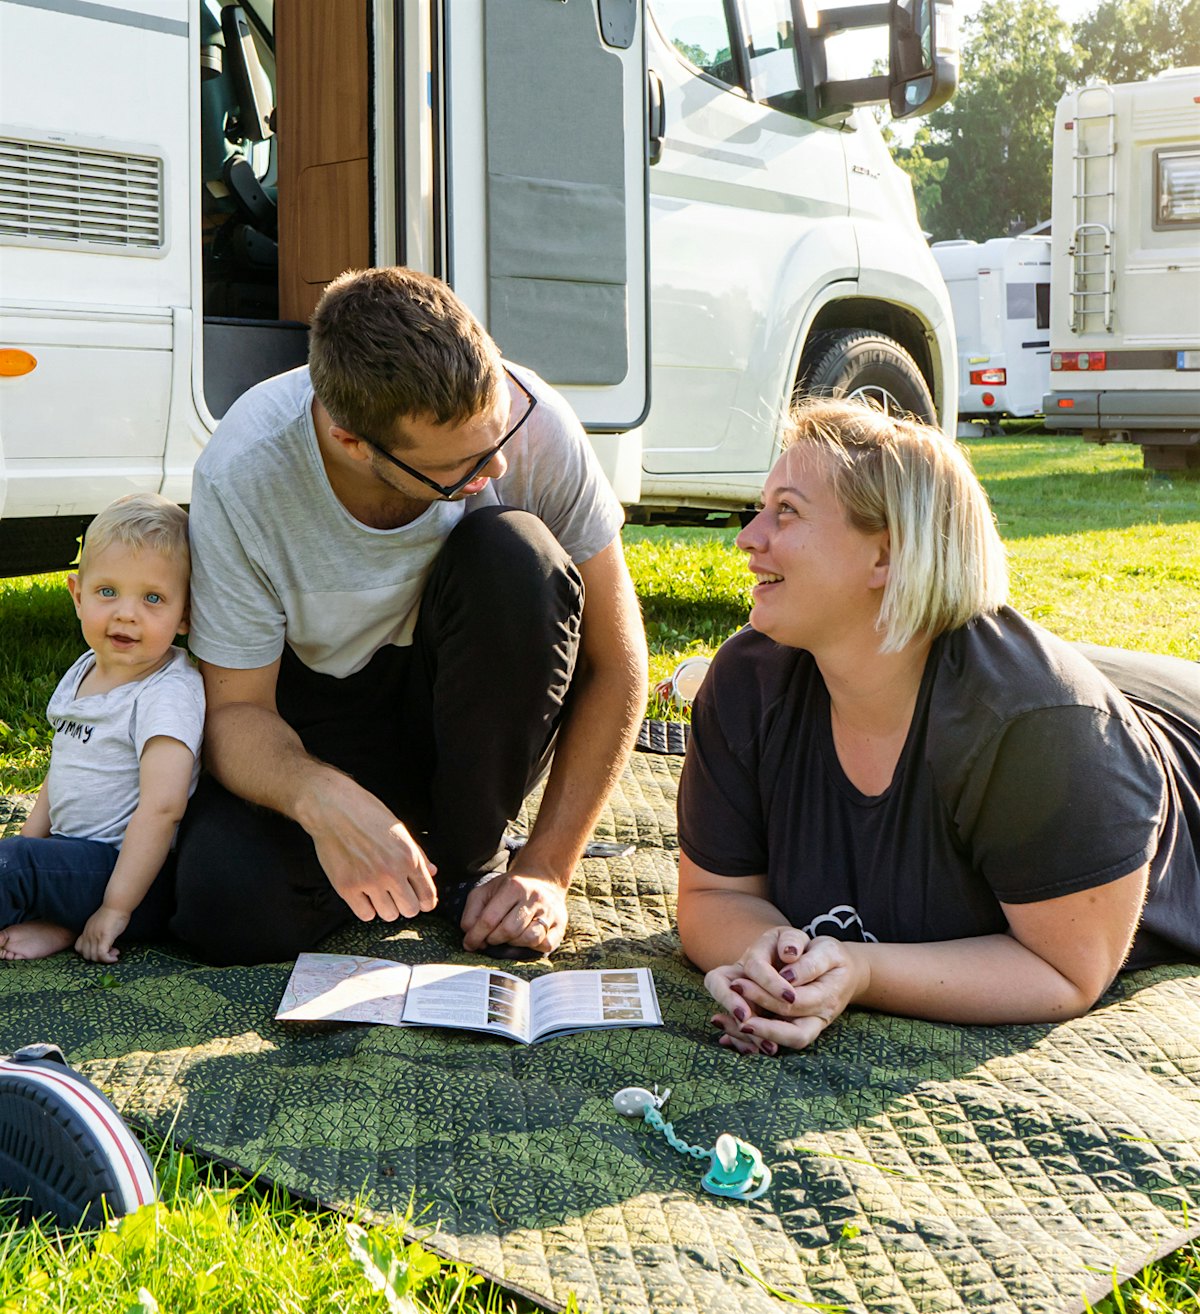 Family sits on carpet outside motorhome, looks at map and each other, and smiles. Photo